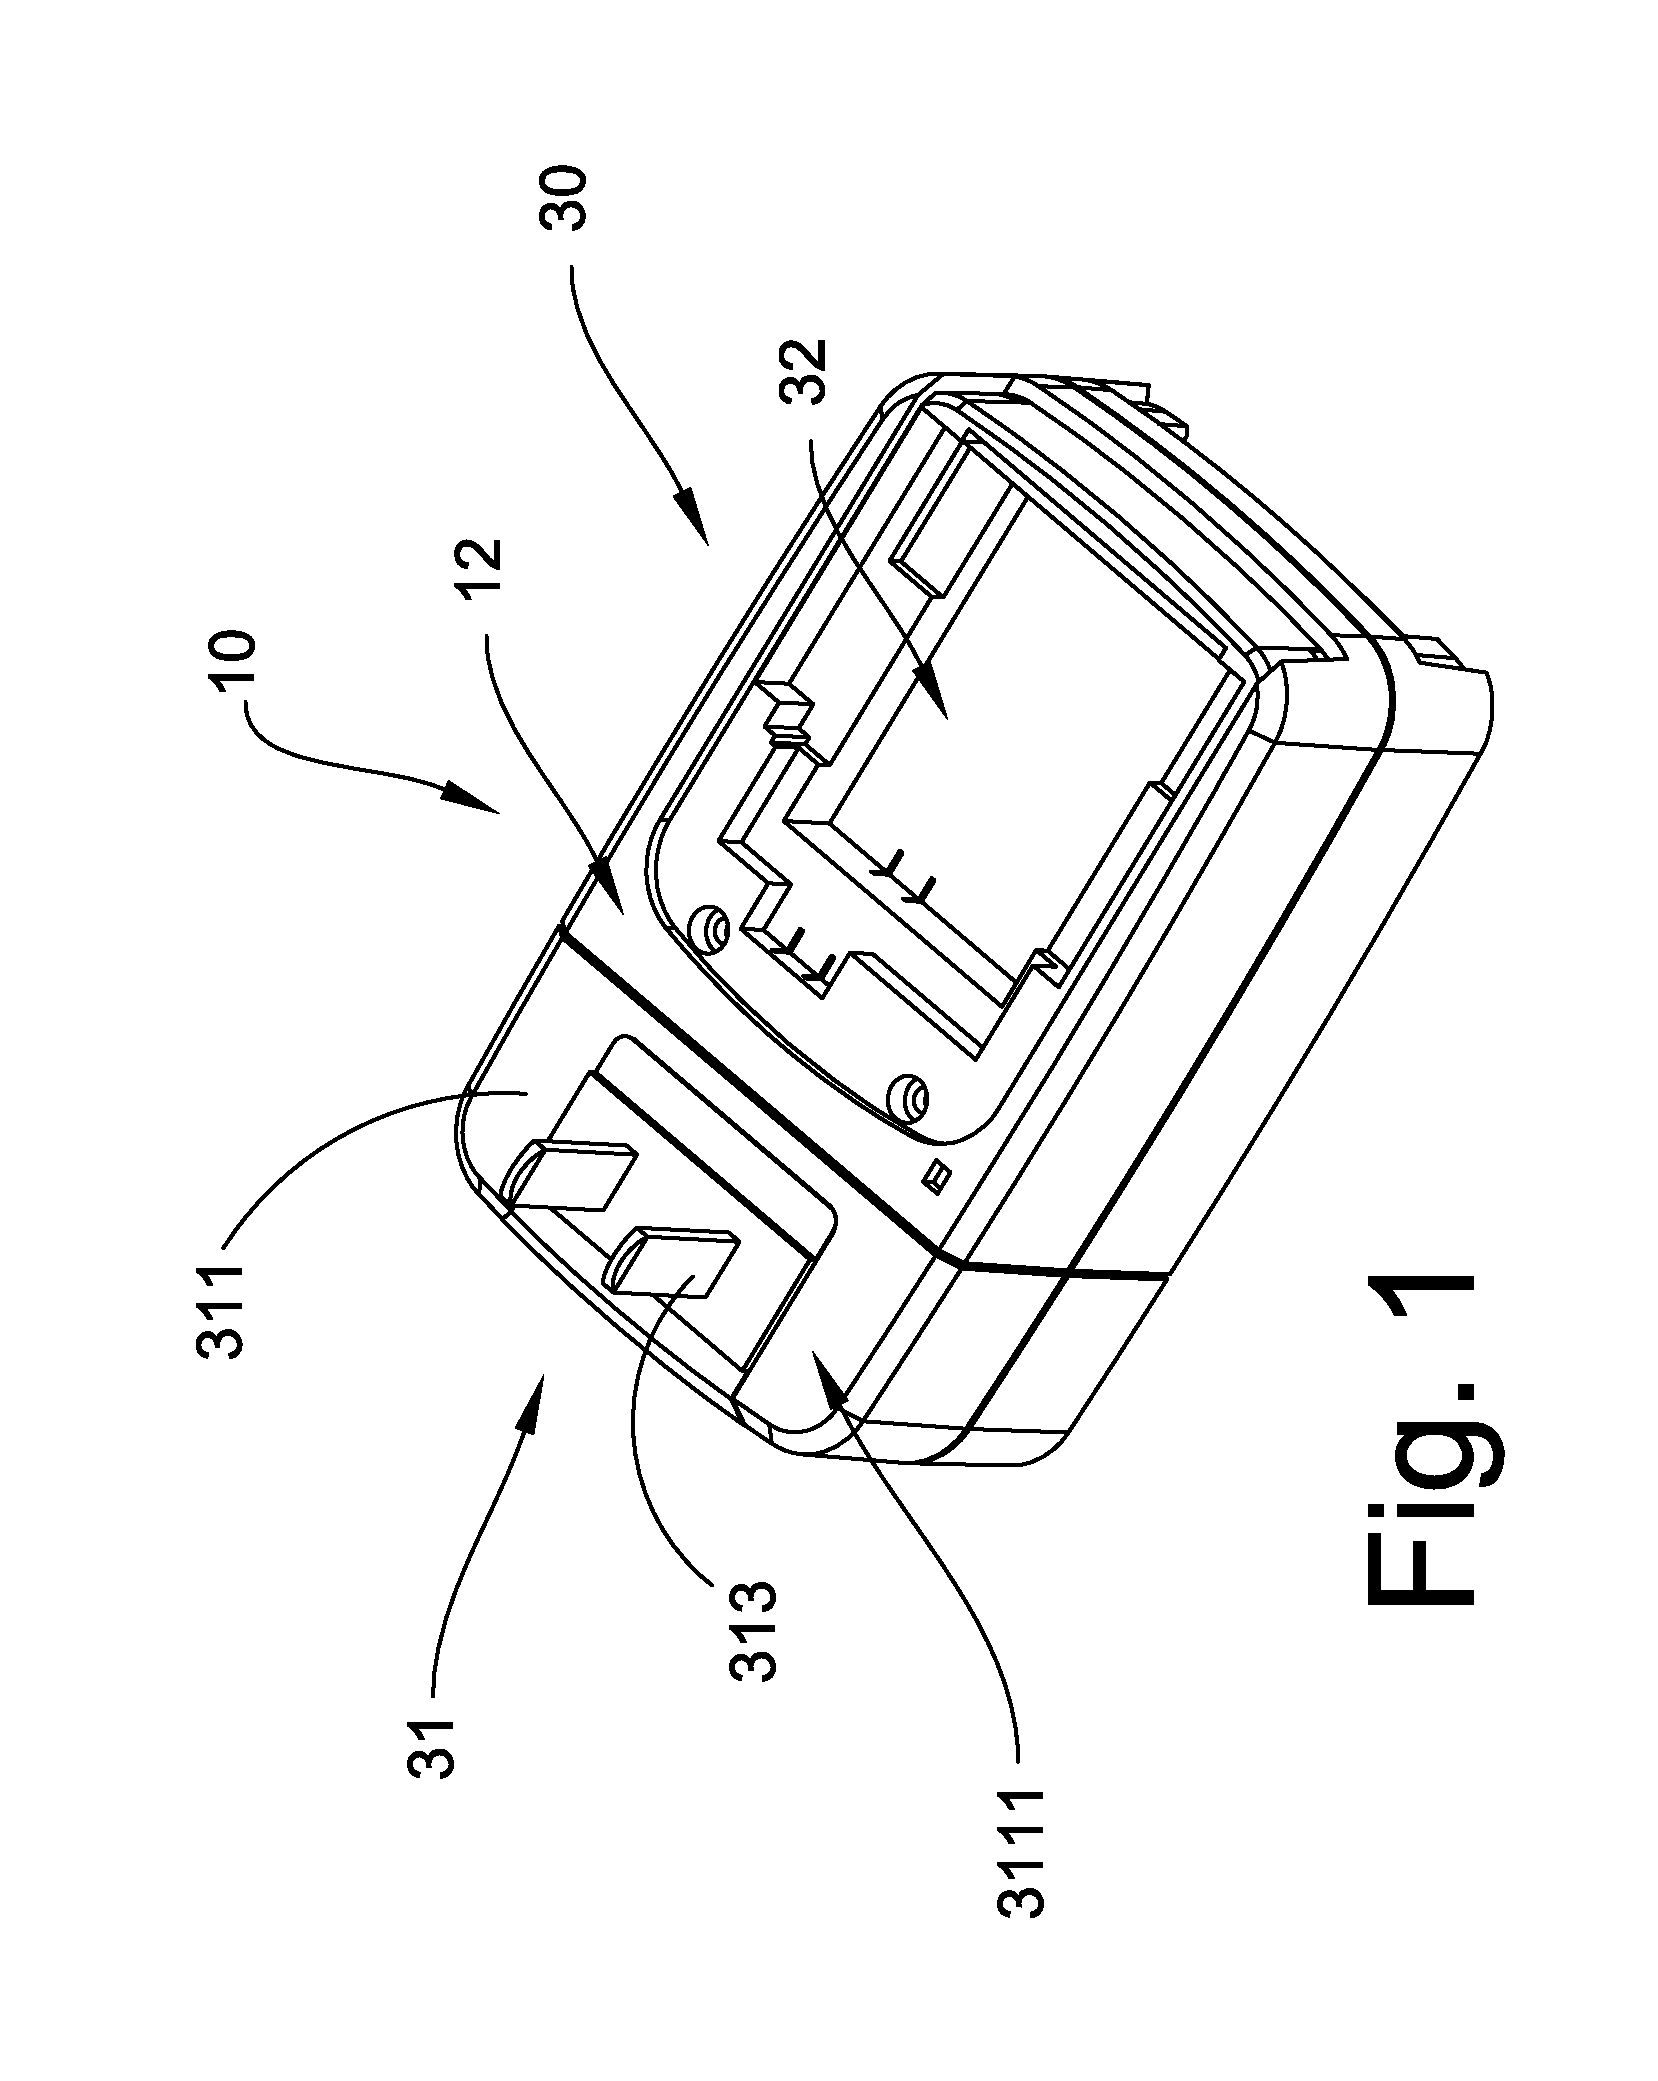 Charger with Multi-sided Arrangement